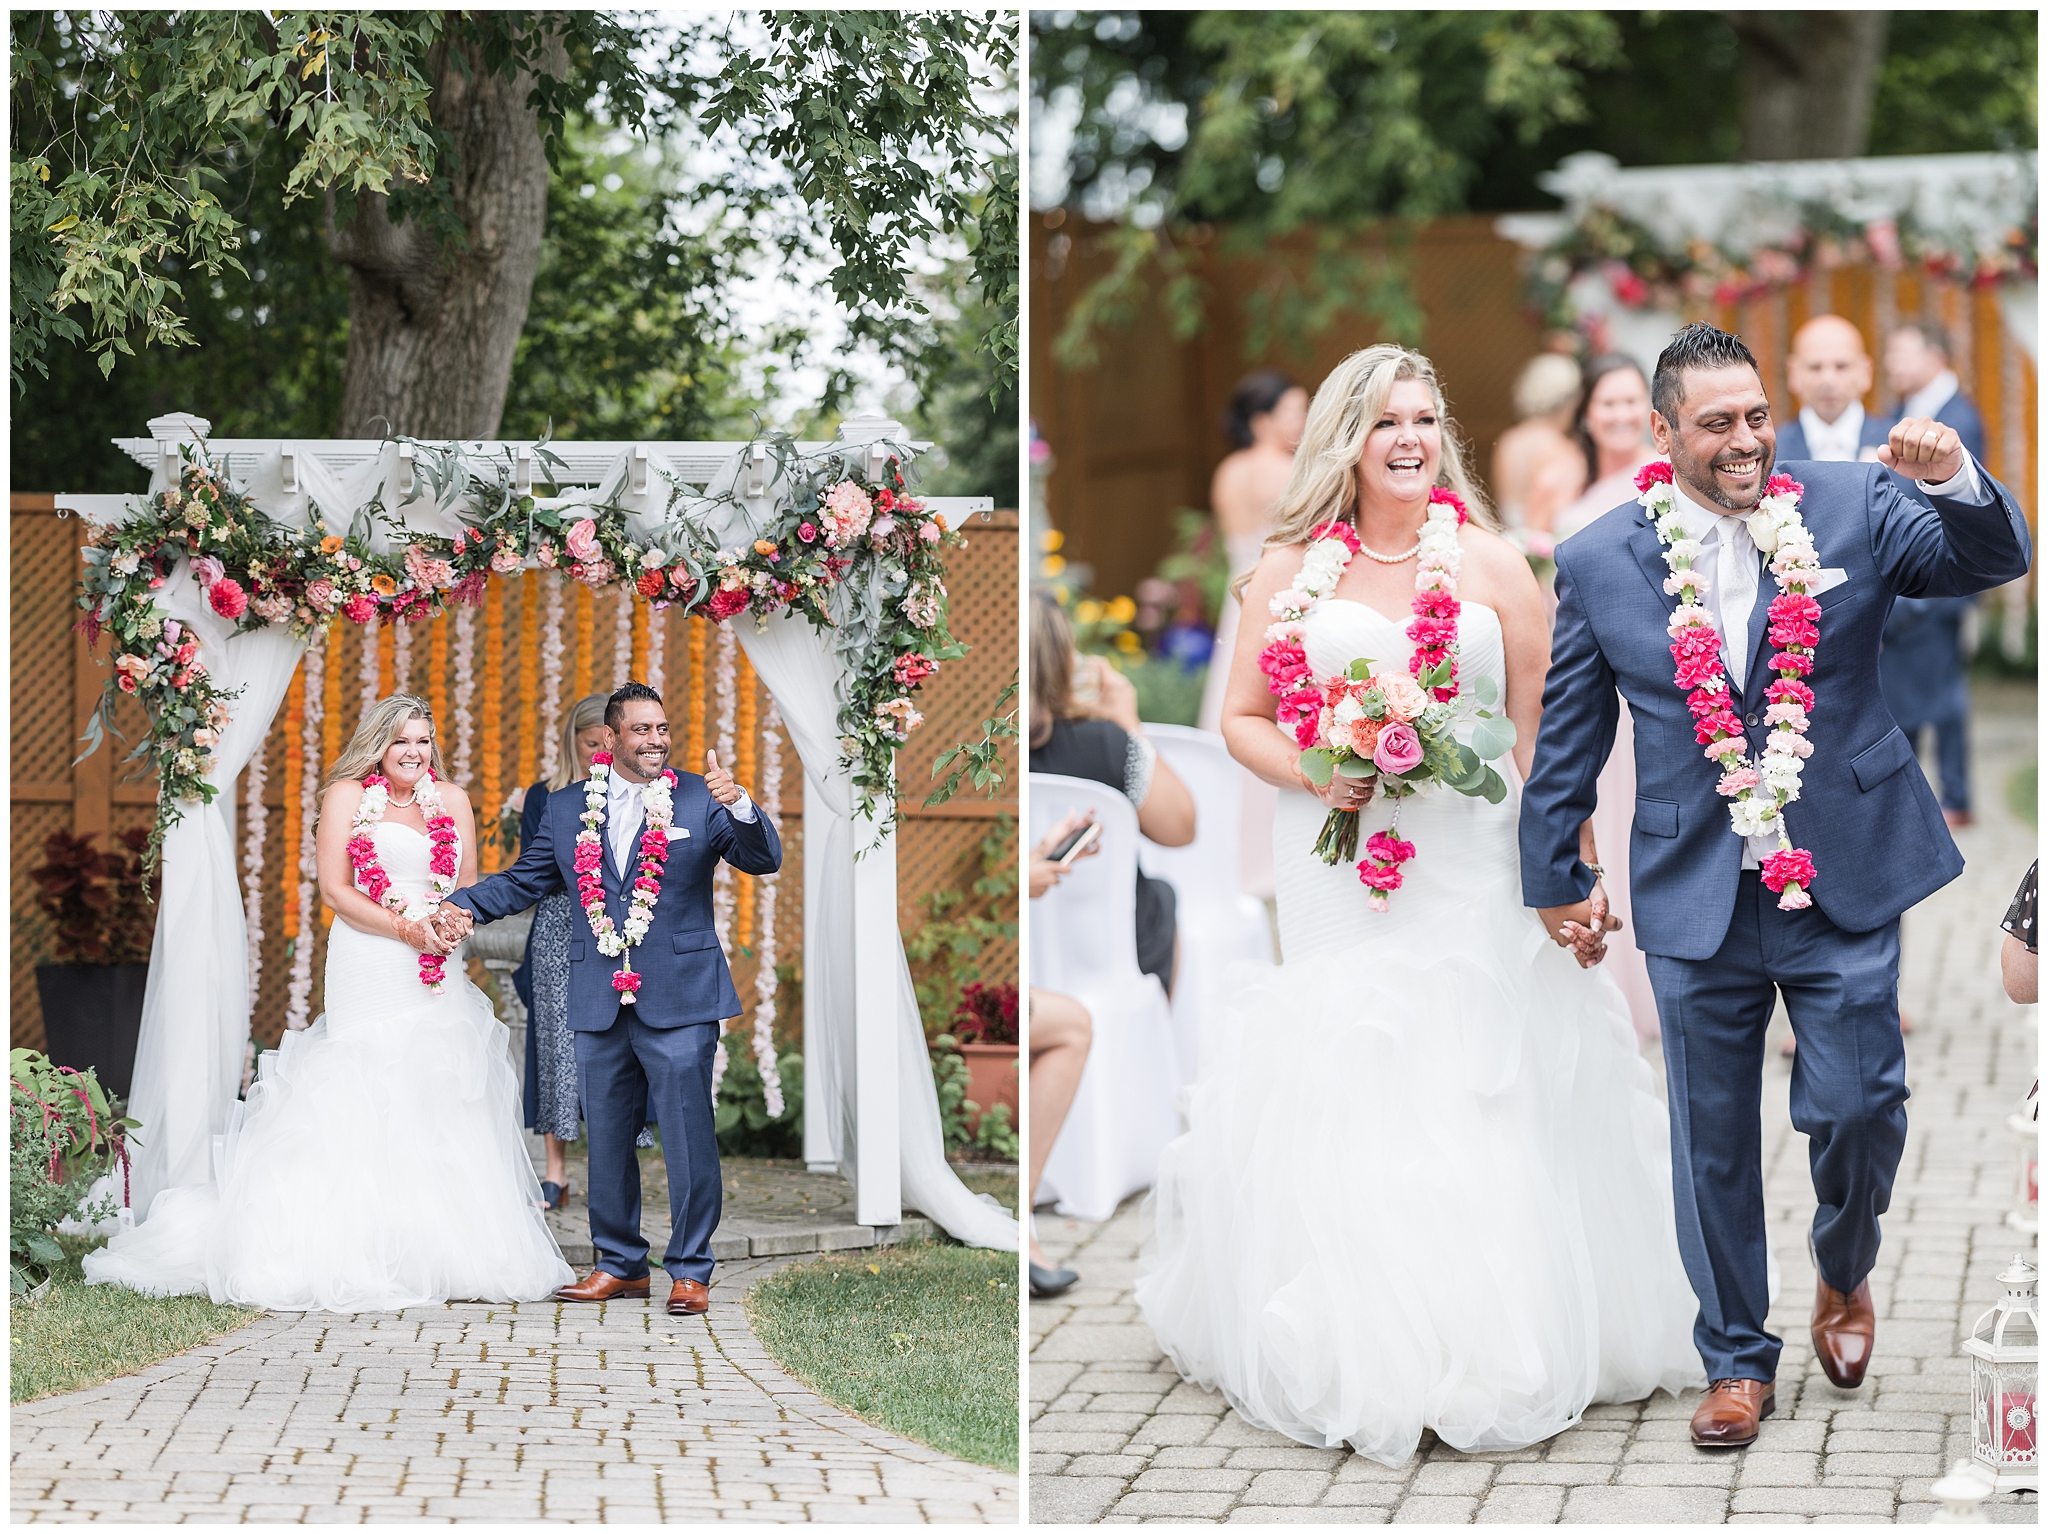 Colourful multicultural wedding 0045